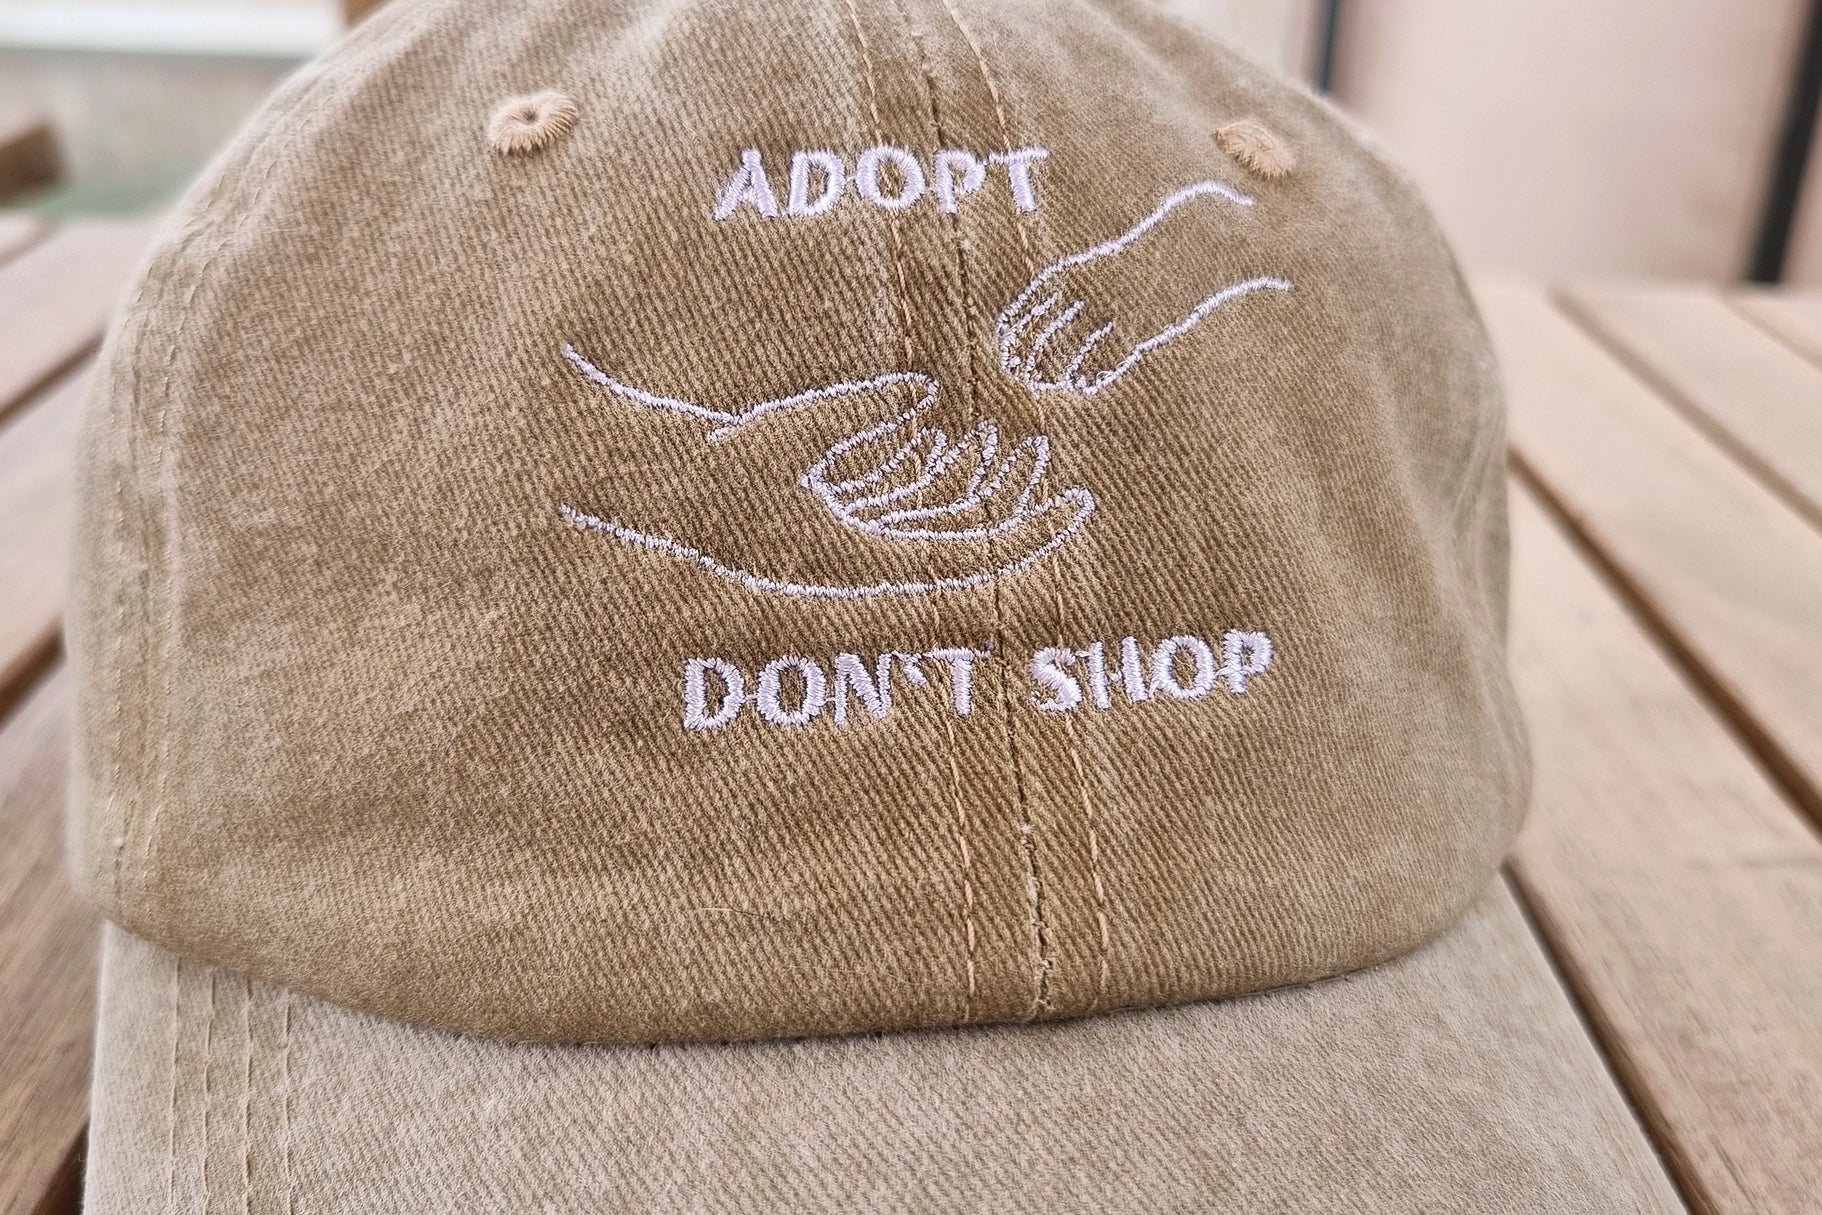 Adopt don't shop baseball cap - spread the message and support animal welfare with this vintage style baseball cap